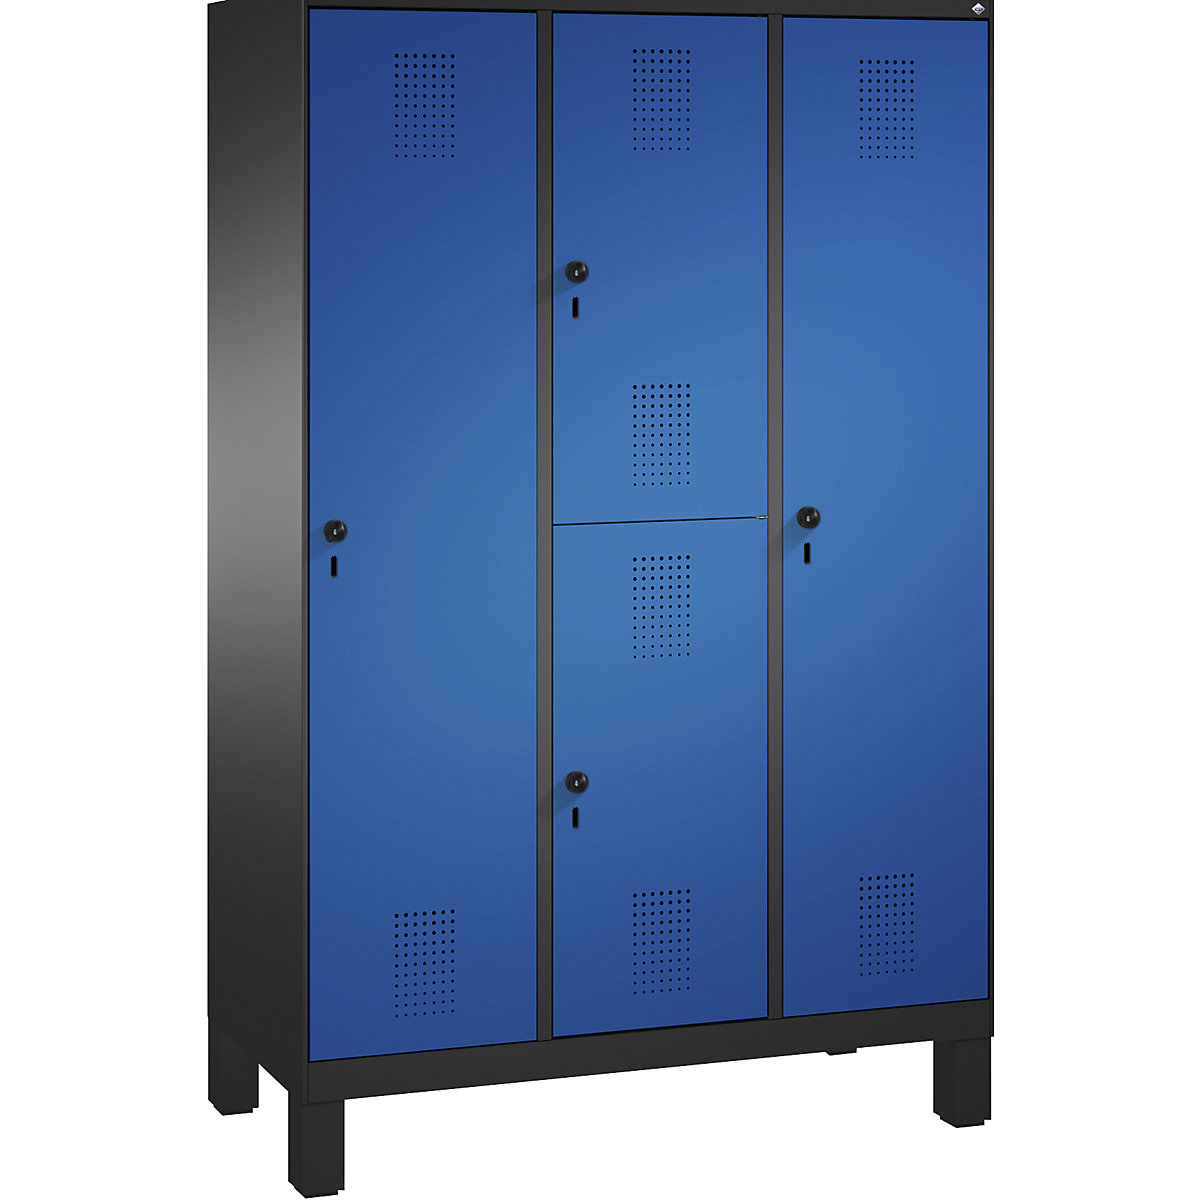 EVOLO combination cupboard, single and double tier – C+P, 3 compartments, 4 doors, compartment width 400 mm, with feet, black grey / gentian blue